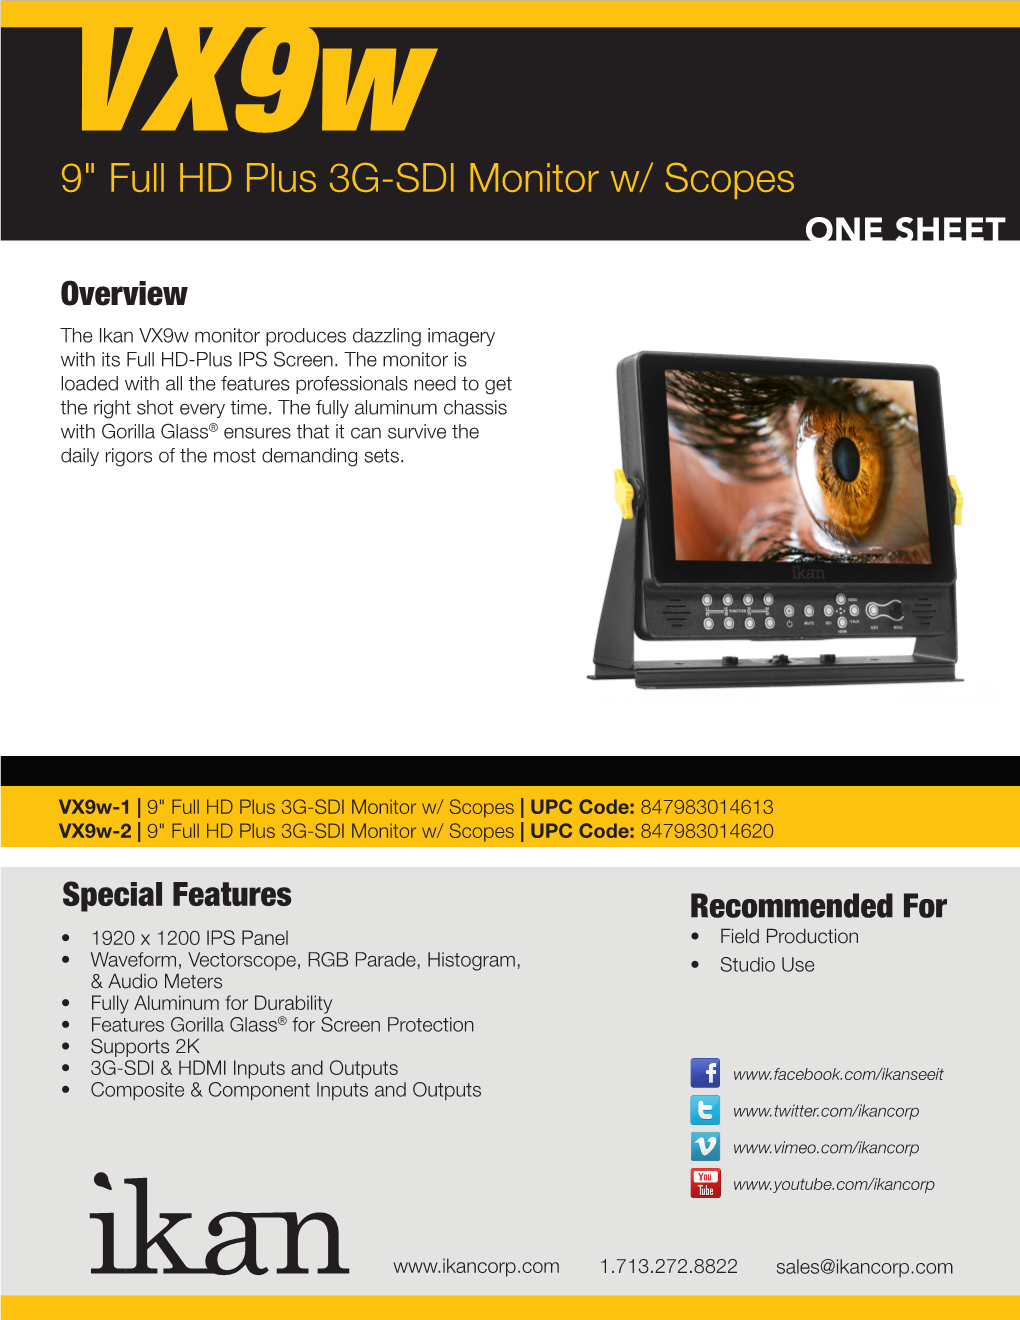 9" Full HD Plus 3G-SDI Monitor W/ Scopes ONE SHEET Overview the Ikan Vx9w Monitor Produces Dazzling Imagery with Its Full HD-Plus IPS Screen